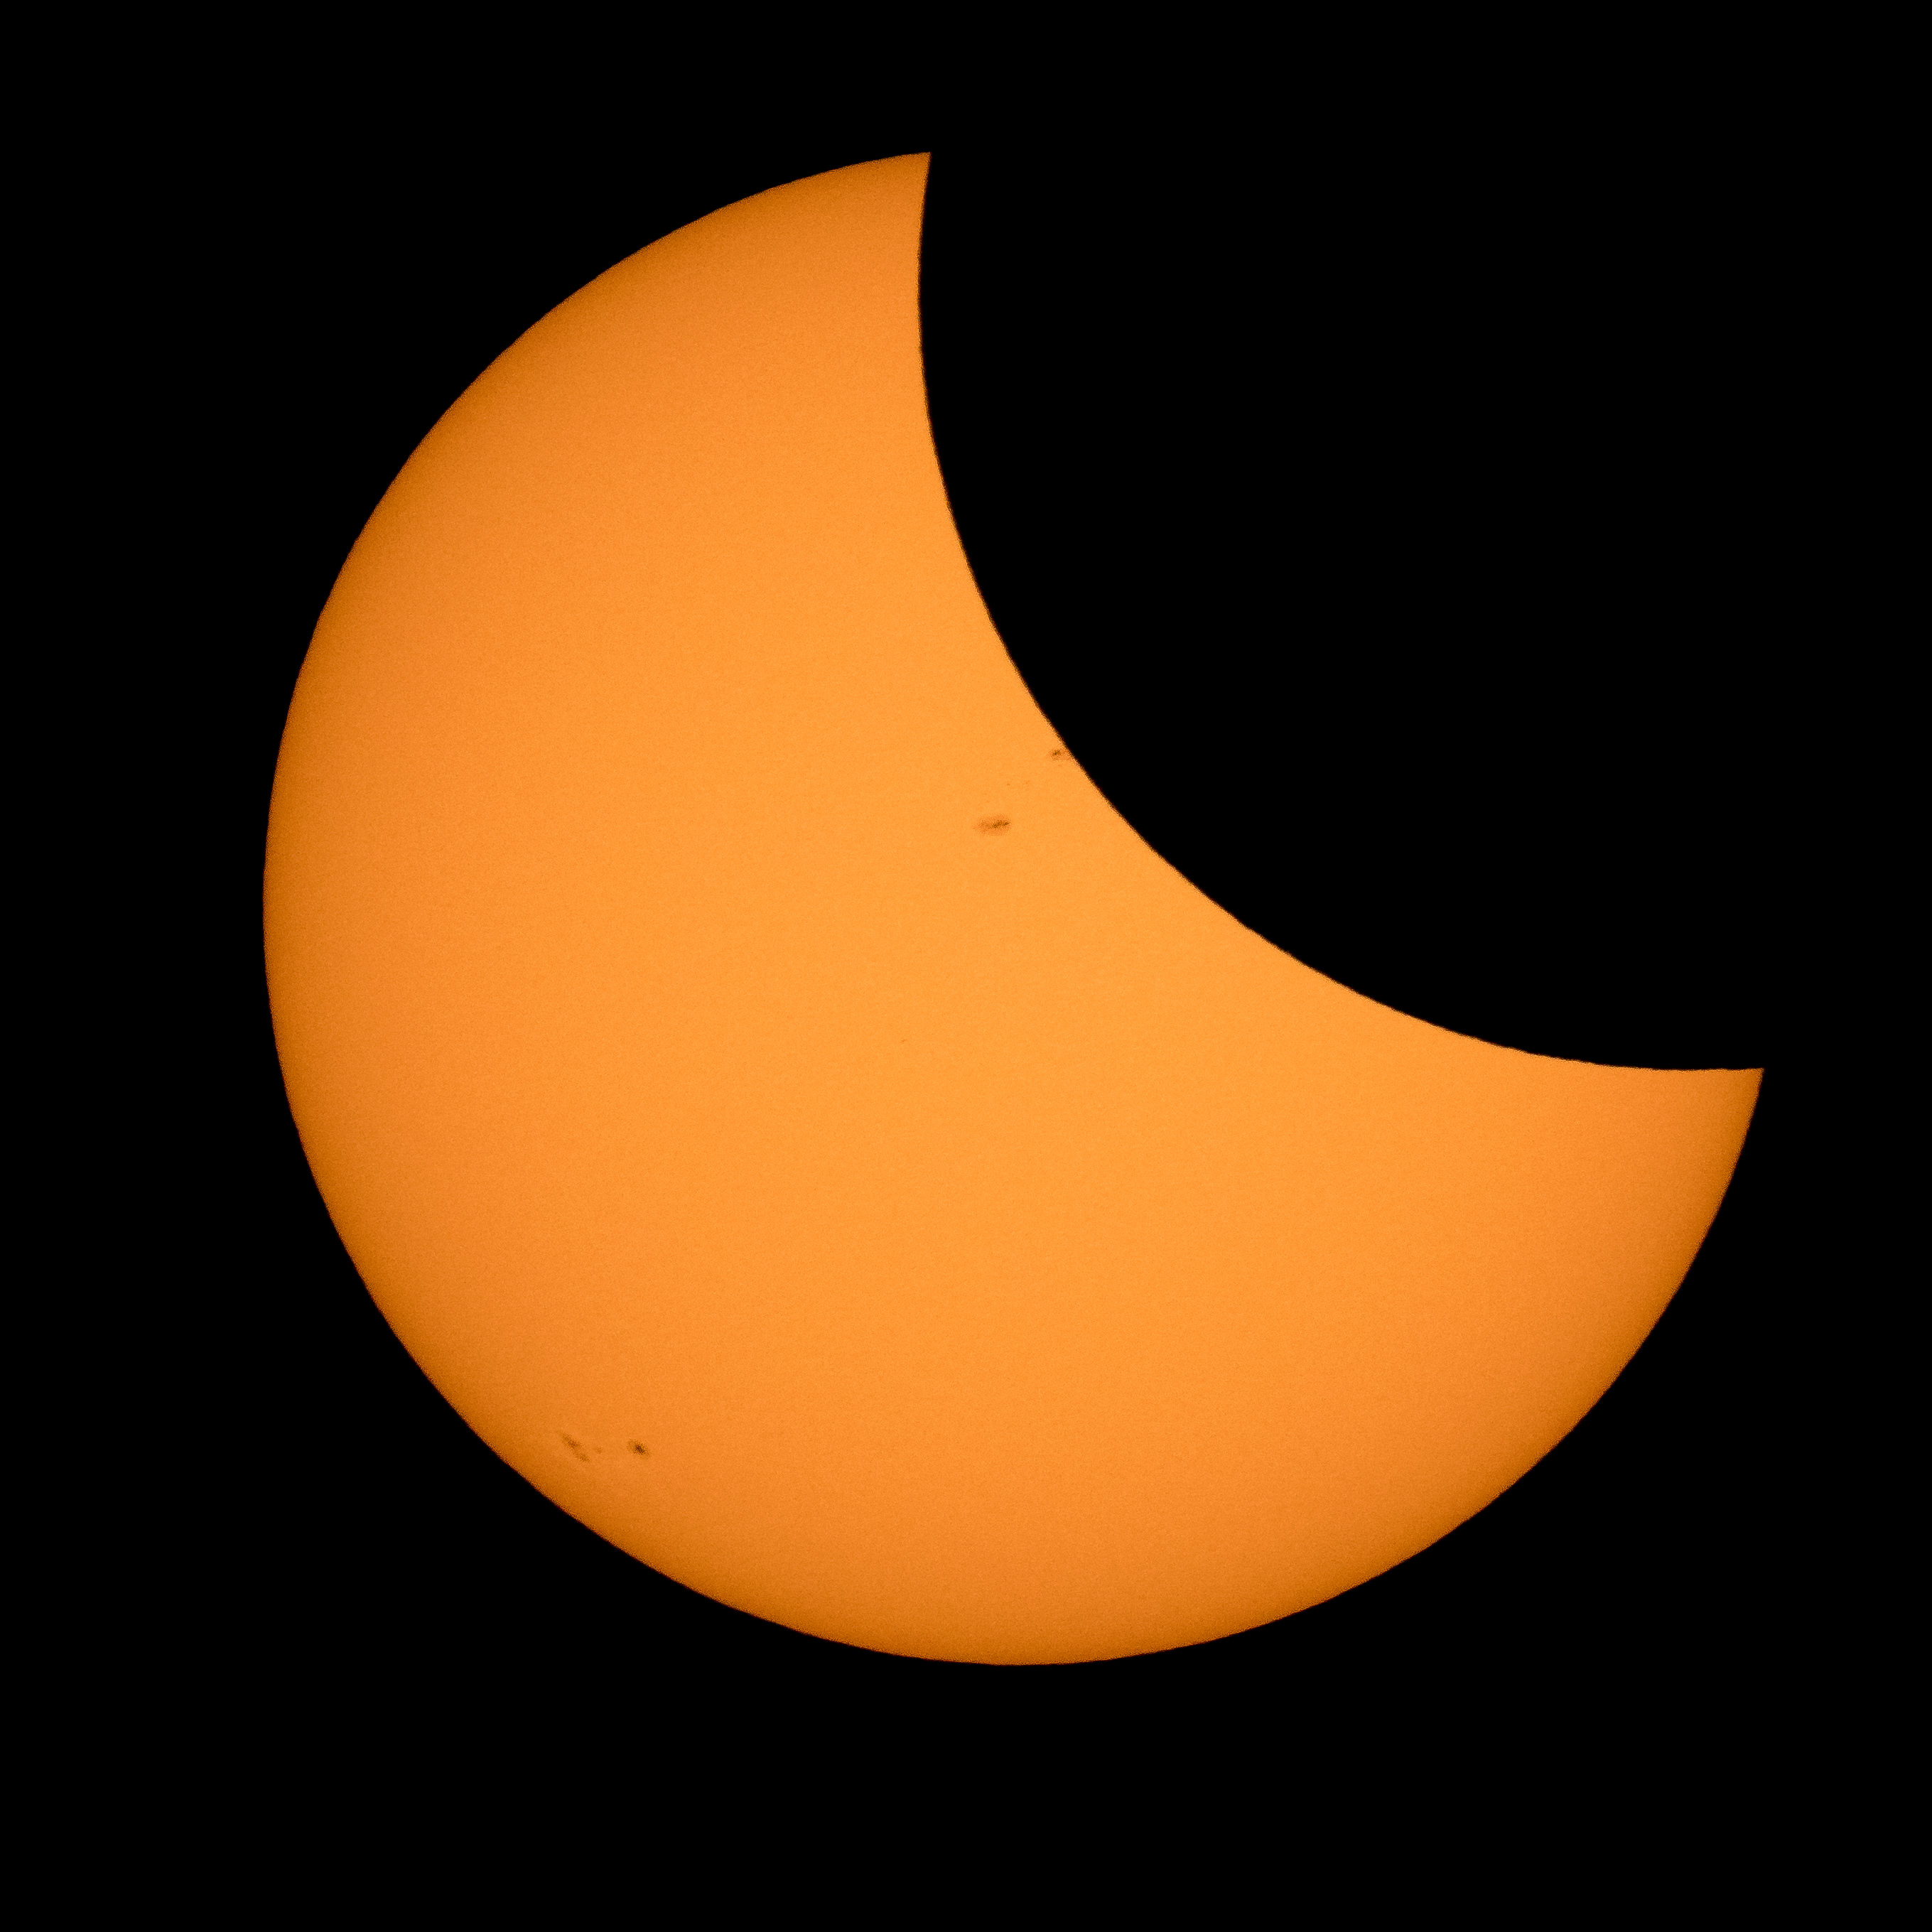 The Sun appears as a large orange crescent, with the upper right portion of it covered by the Moon, which just appears as a black disk. A few sunspots can be seen near the middle and lower left edges of the Sun.